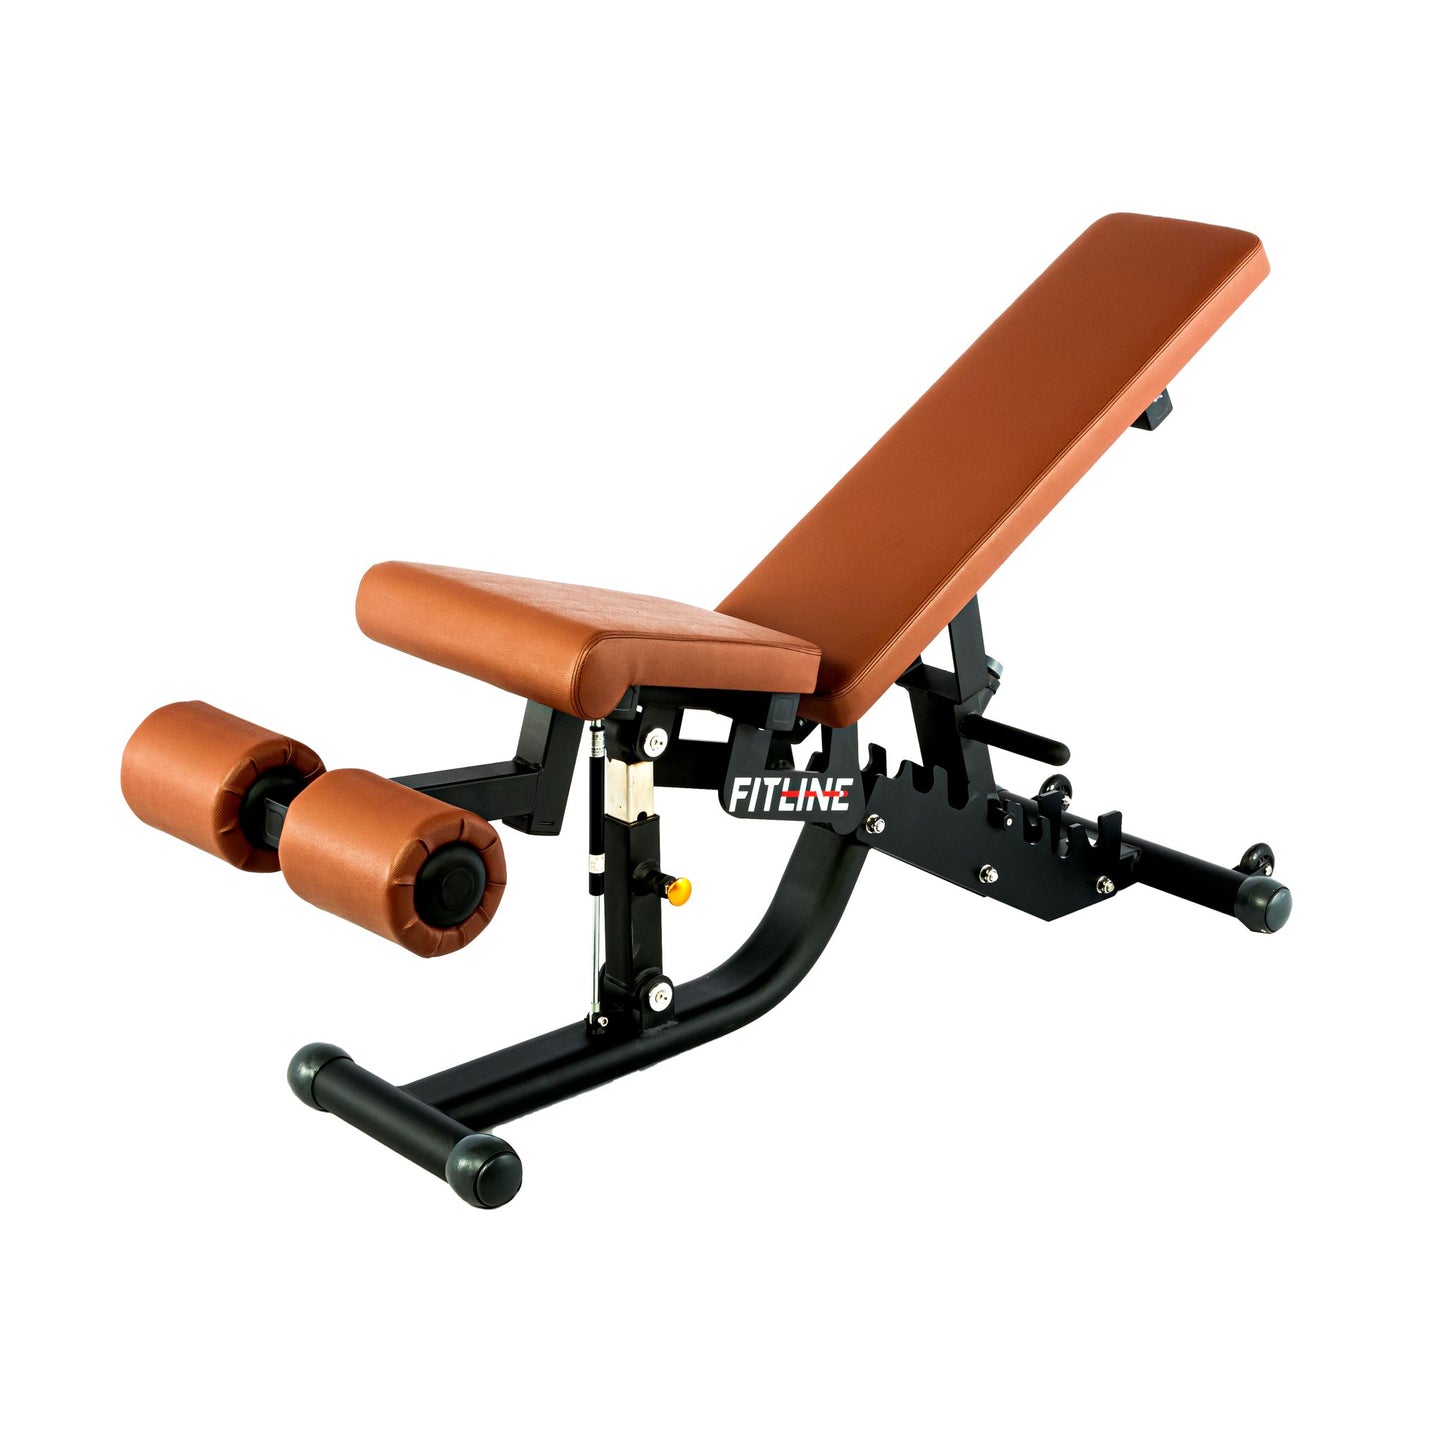 DZ-33 - MULTI BENCH WITH DECLINE - Fitline India